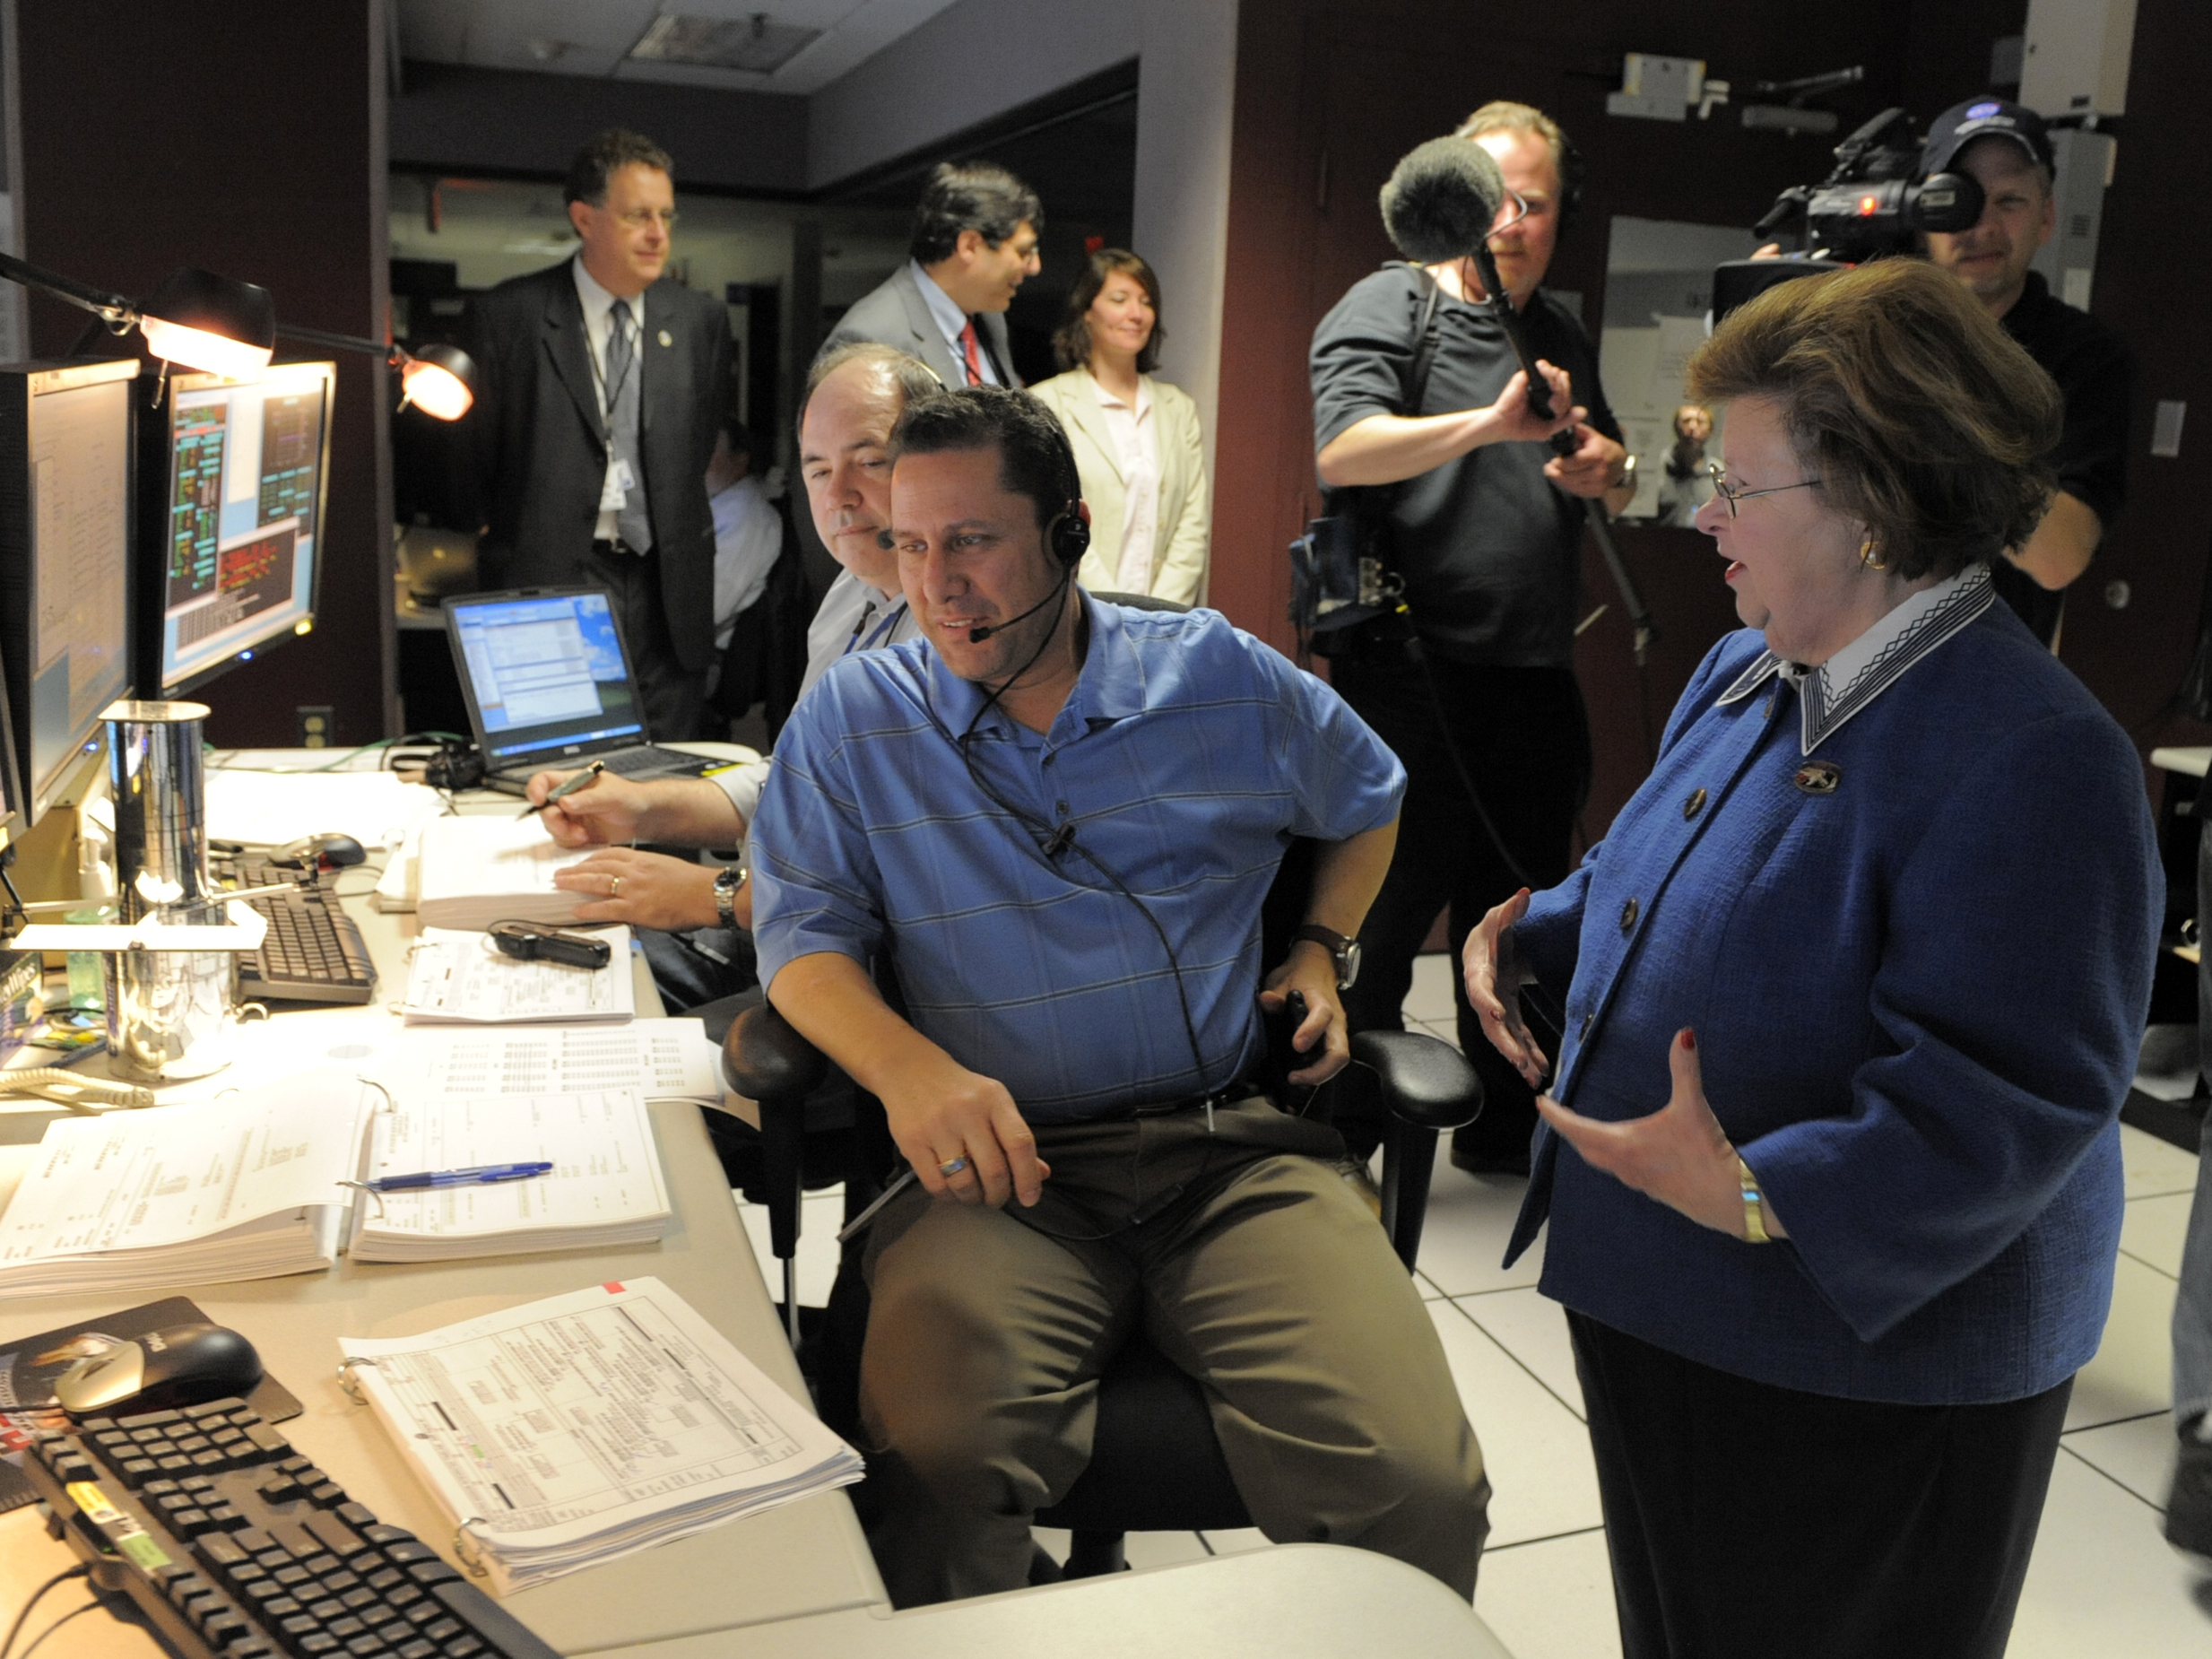 Senator Barbara Mikulski gestures as she speaks with a member of the Hubble flight operations team. He sits at a long desk with another team member. The desk is covered with computers, keyboards, stacks of paper bound together with o-rings so it can be flipped through easily, and a small Hubble model. Other figures are visible in the background, including someone holding a boom mic to capture their interaction.